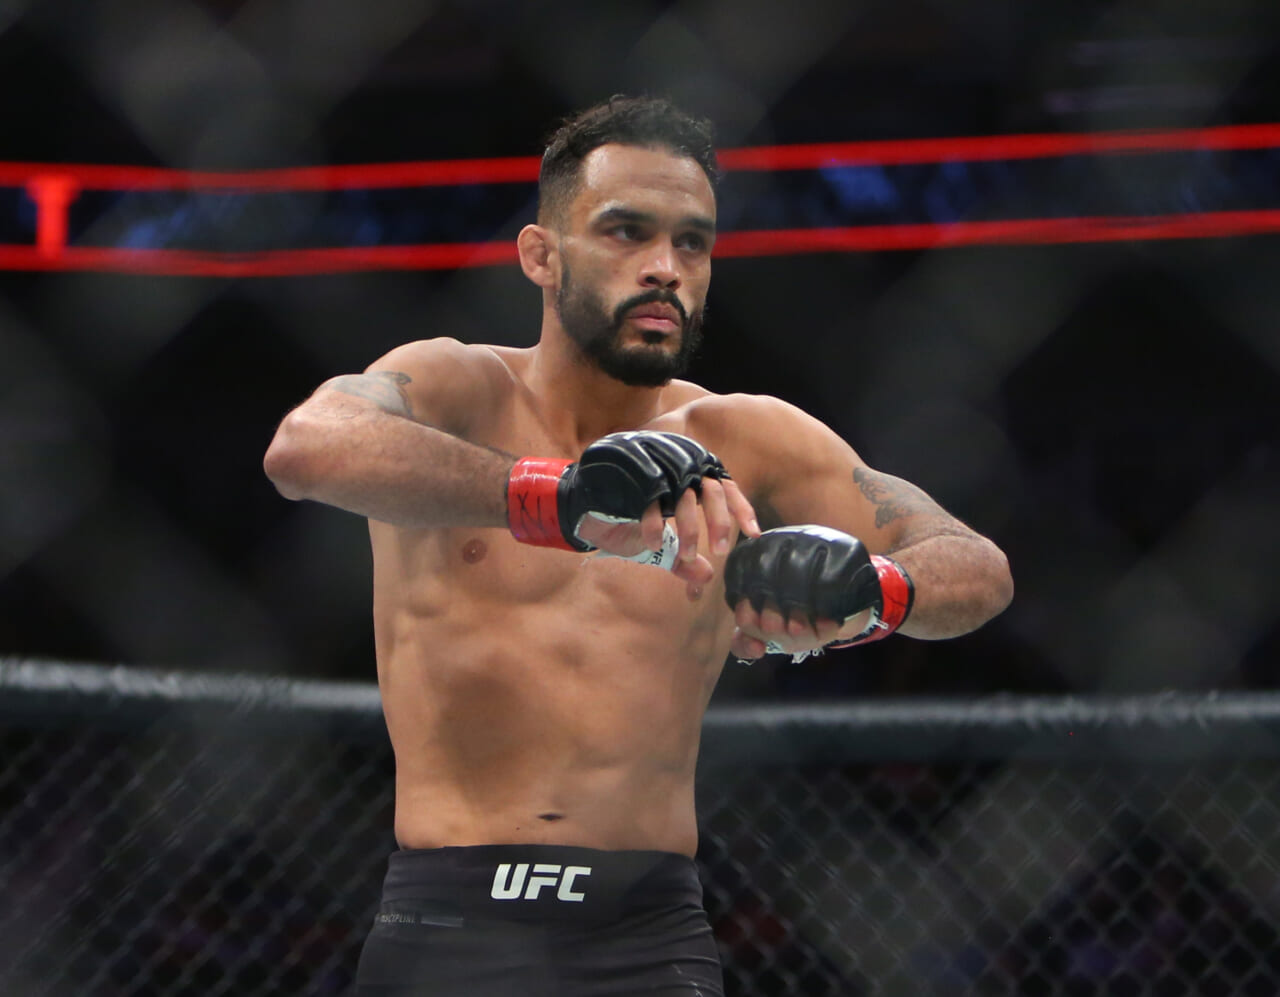 What’s next for Rob Font after UFC Vegas 17?